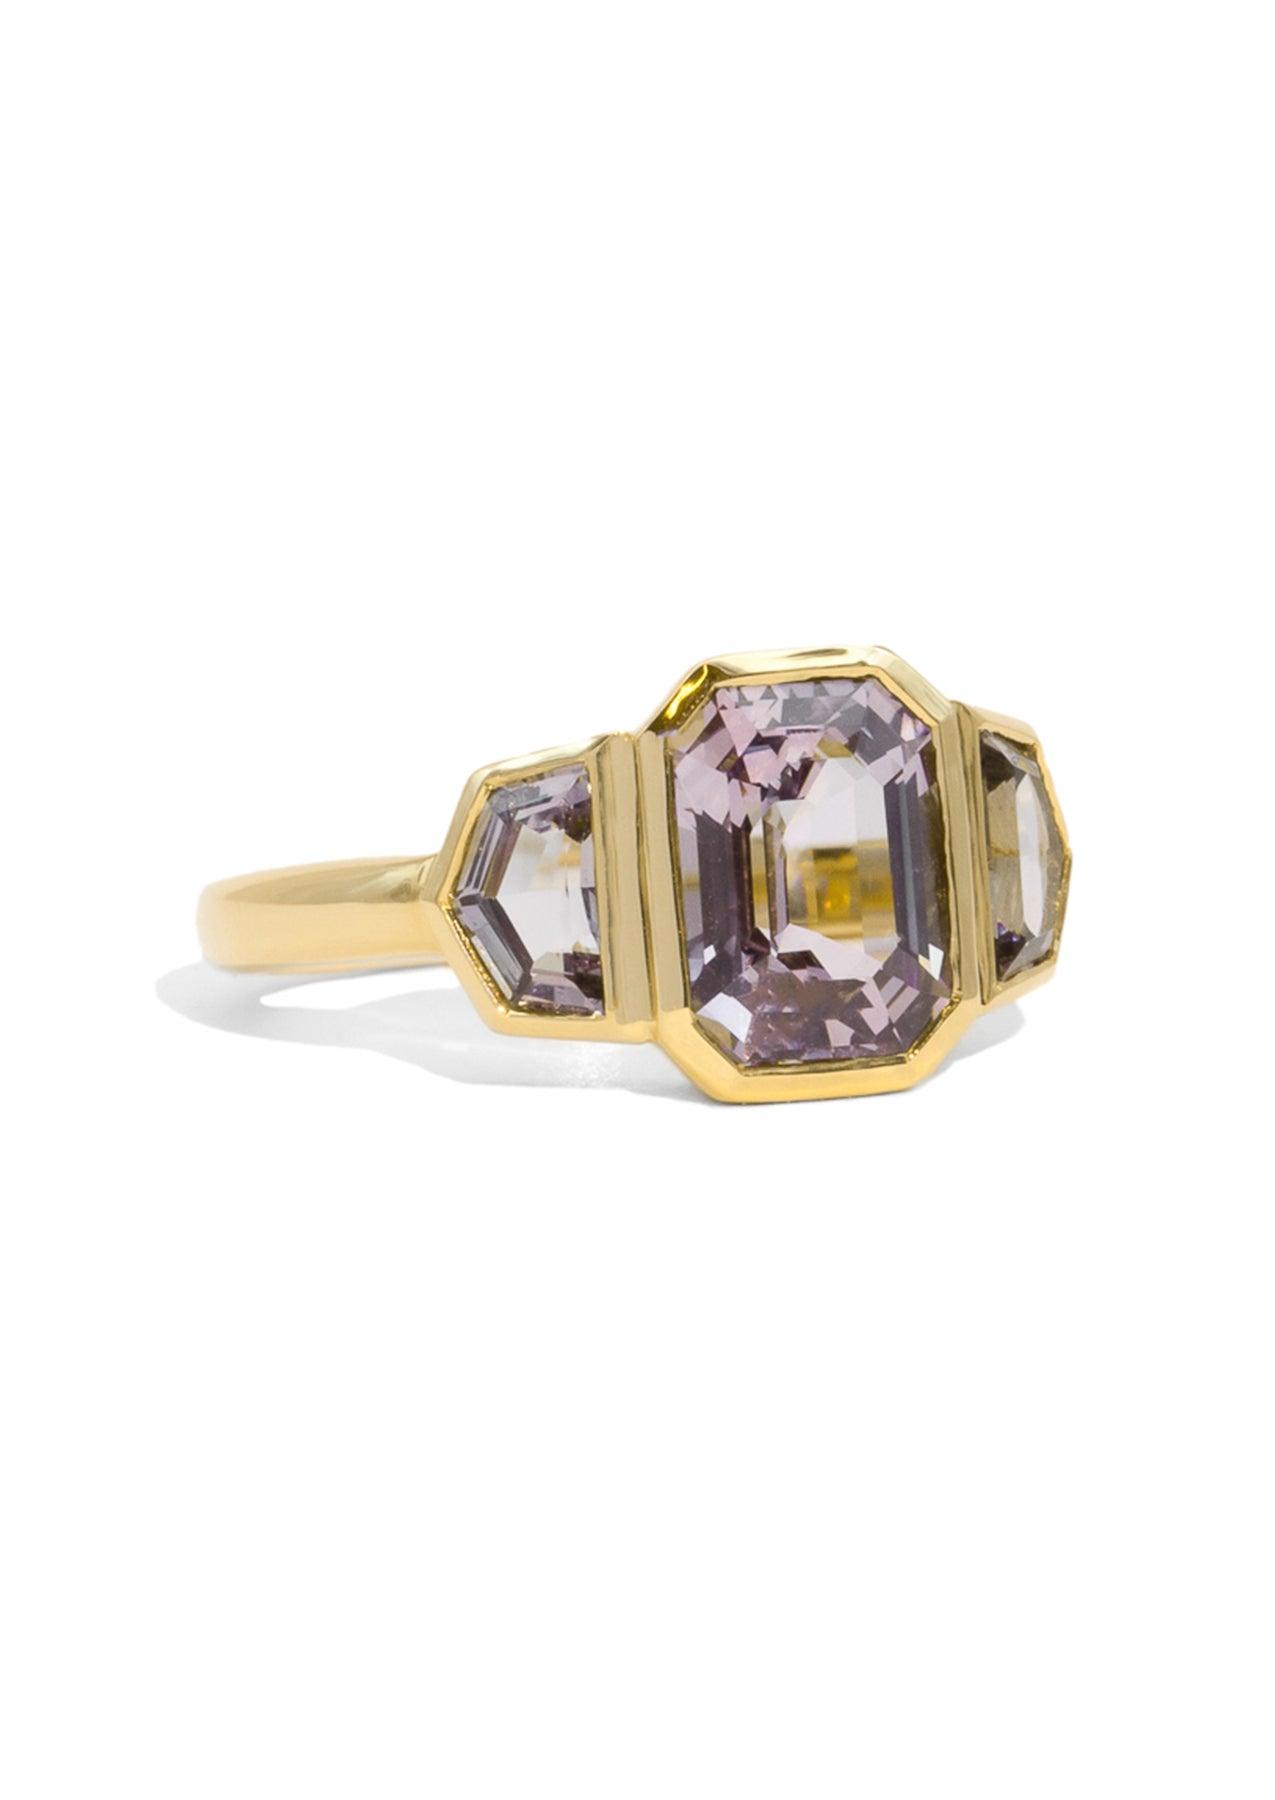 The Beatrice 3.5ct Spinel Ring